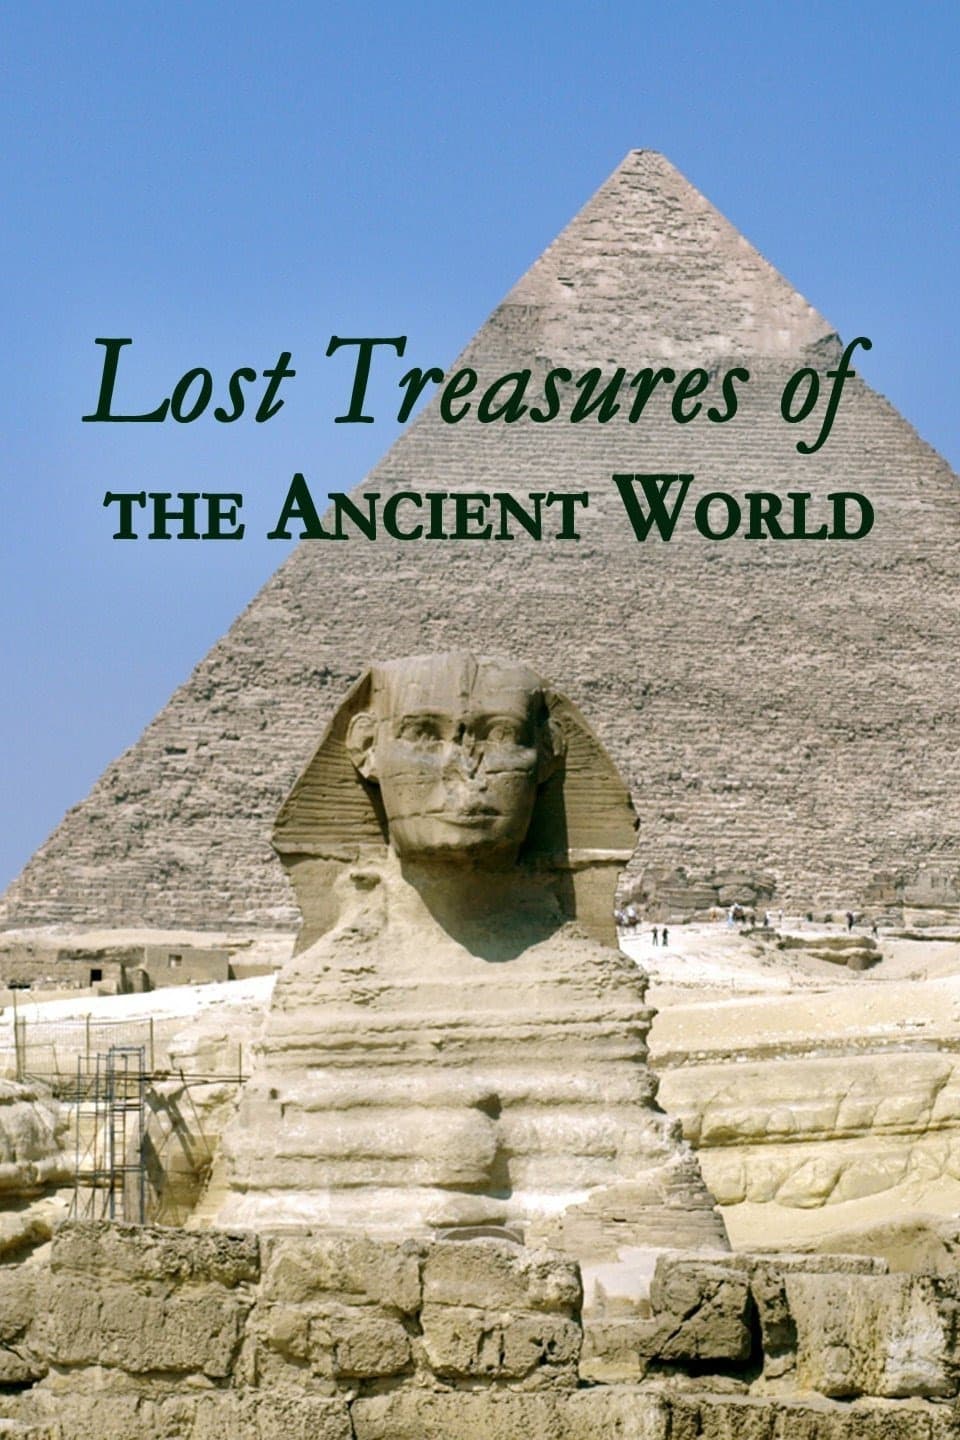 Lost Treasures of the Ancient World: The Romans in North Africa